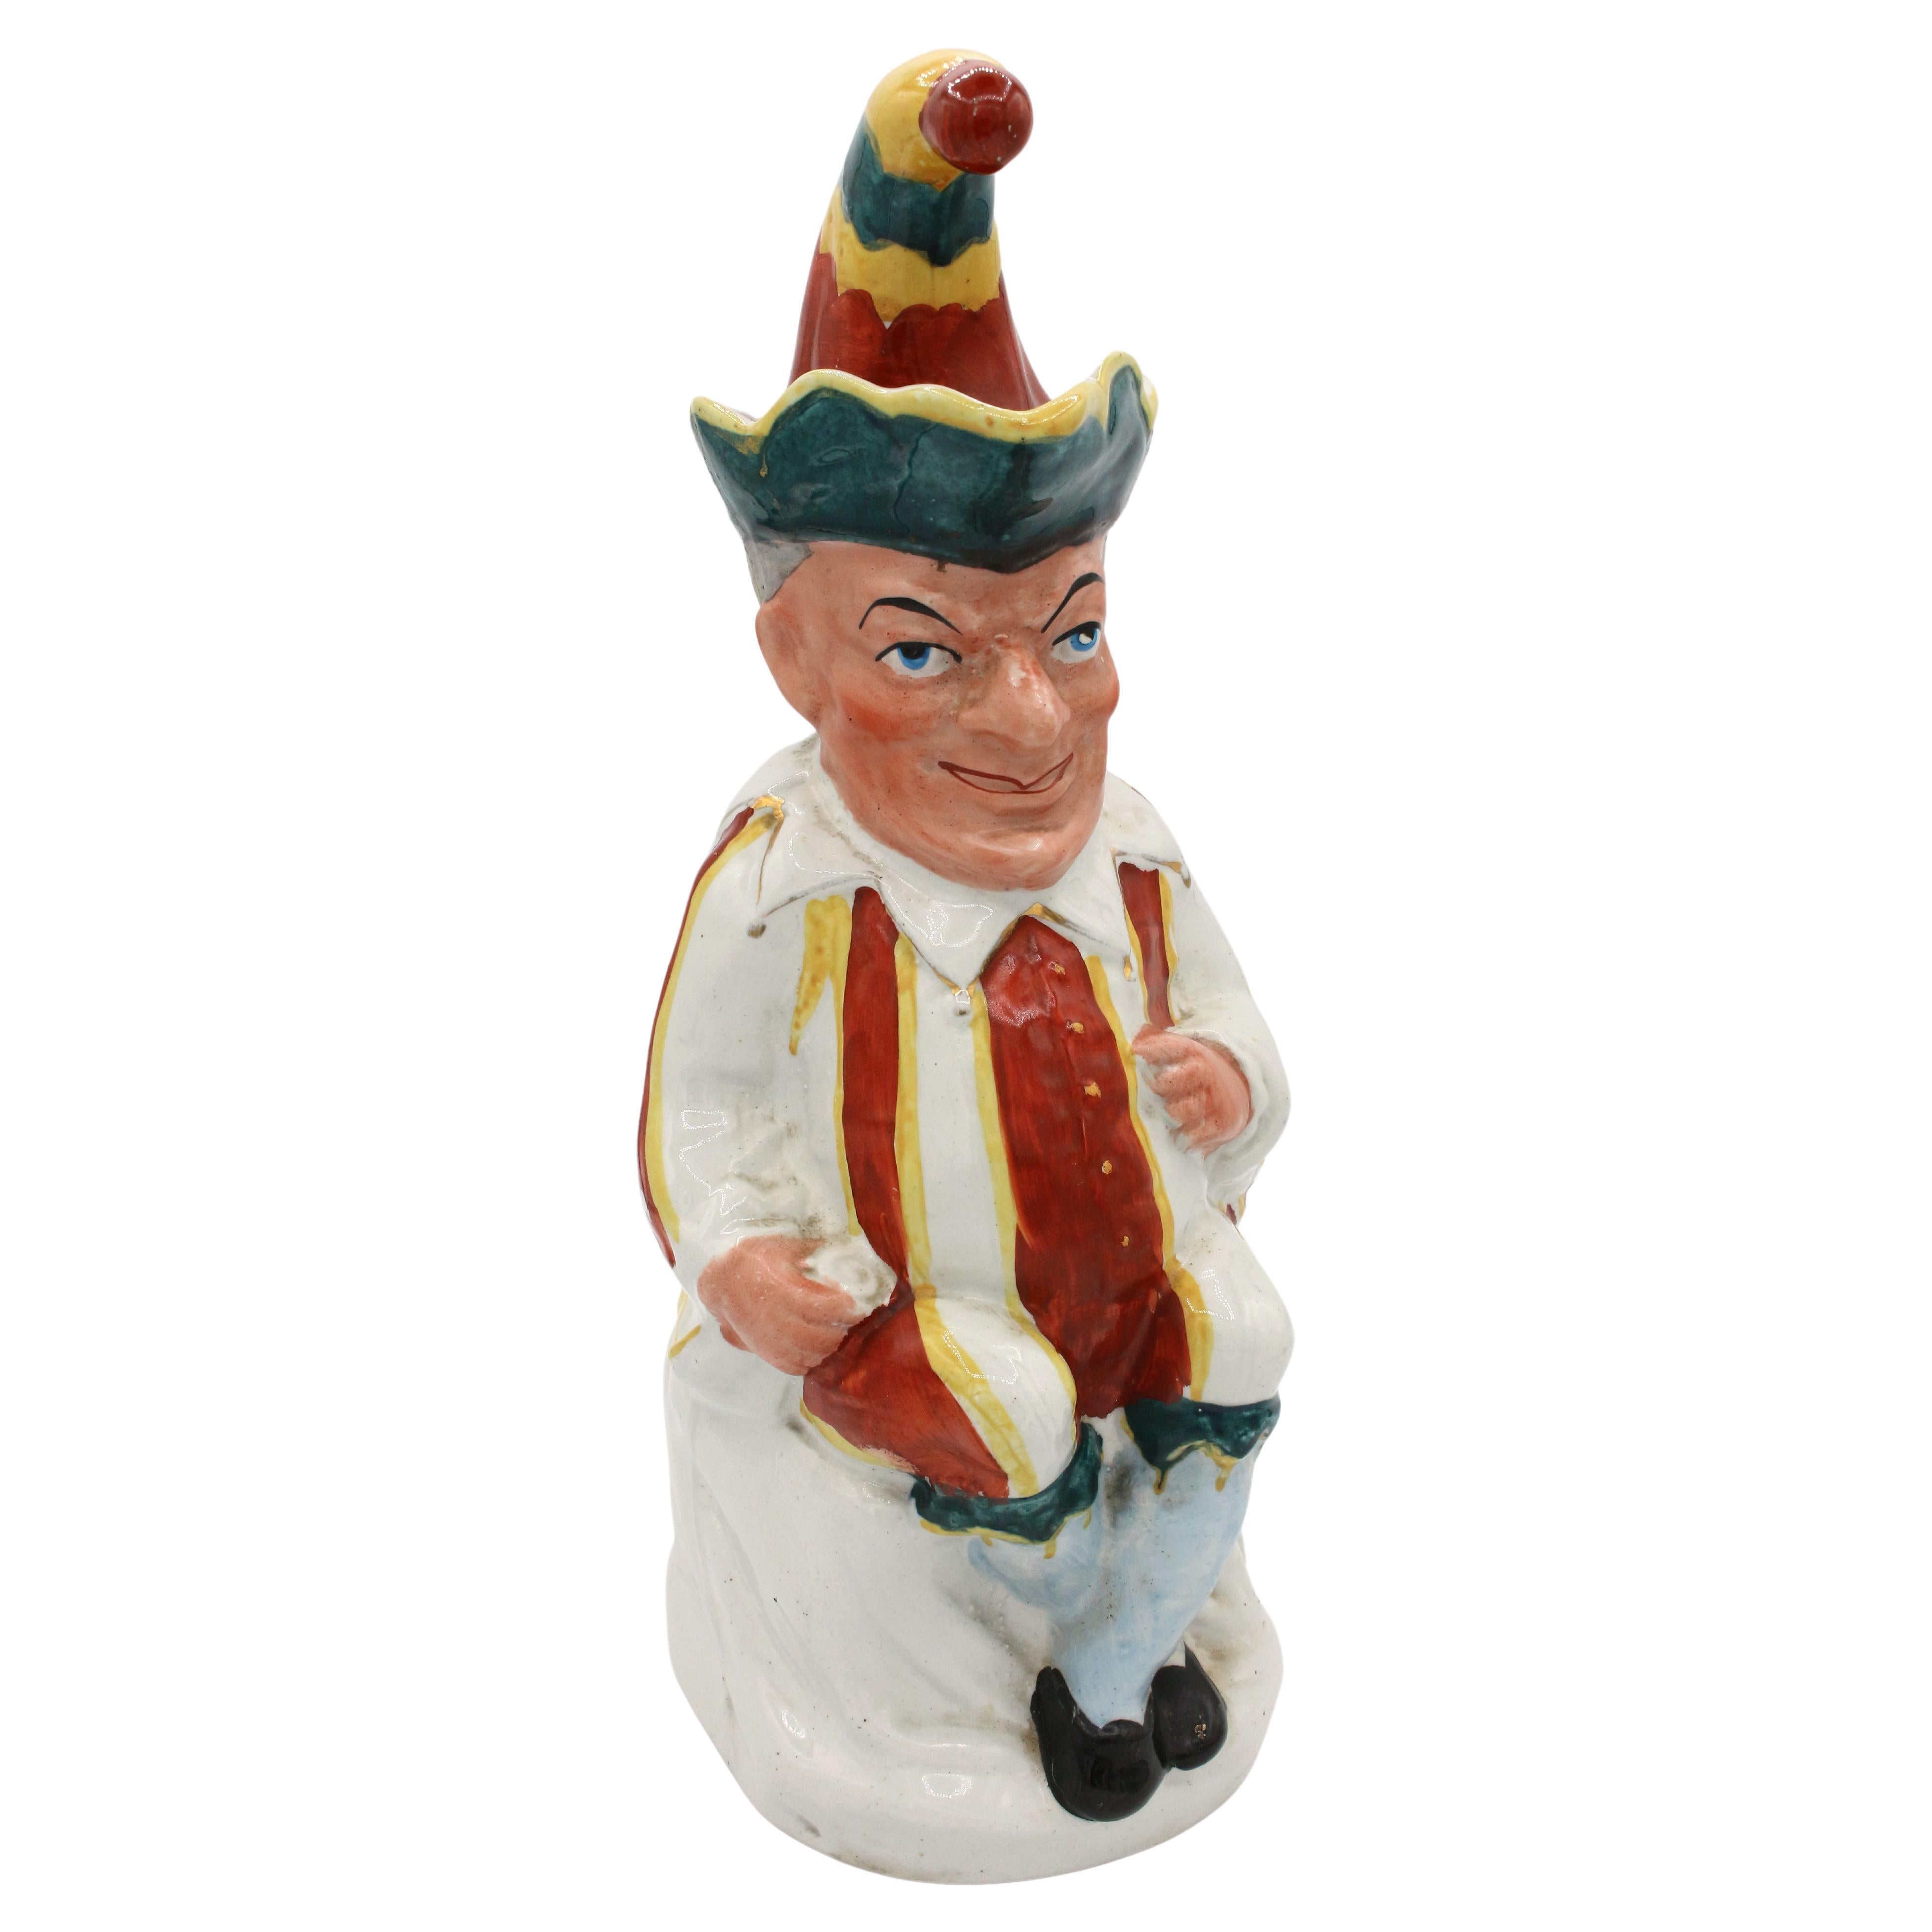 Hilarious Punch figure Toby Jug by William Machin, England, 1889-1910 For Sale